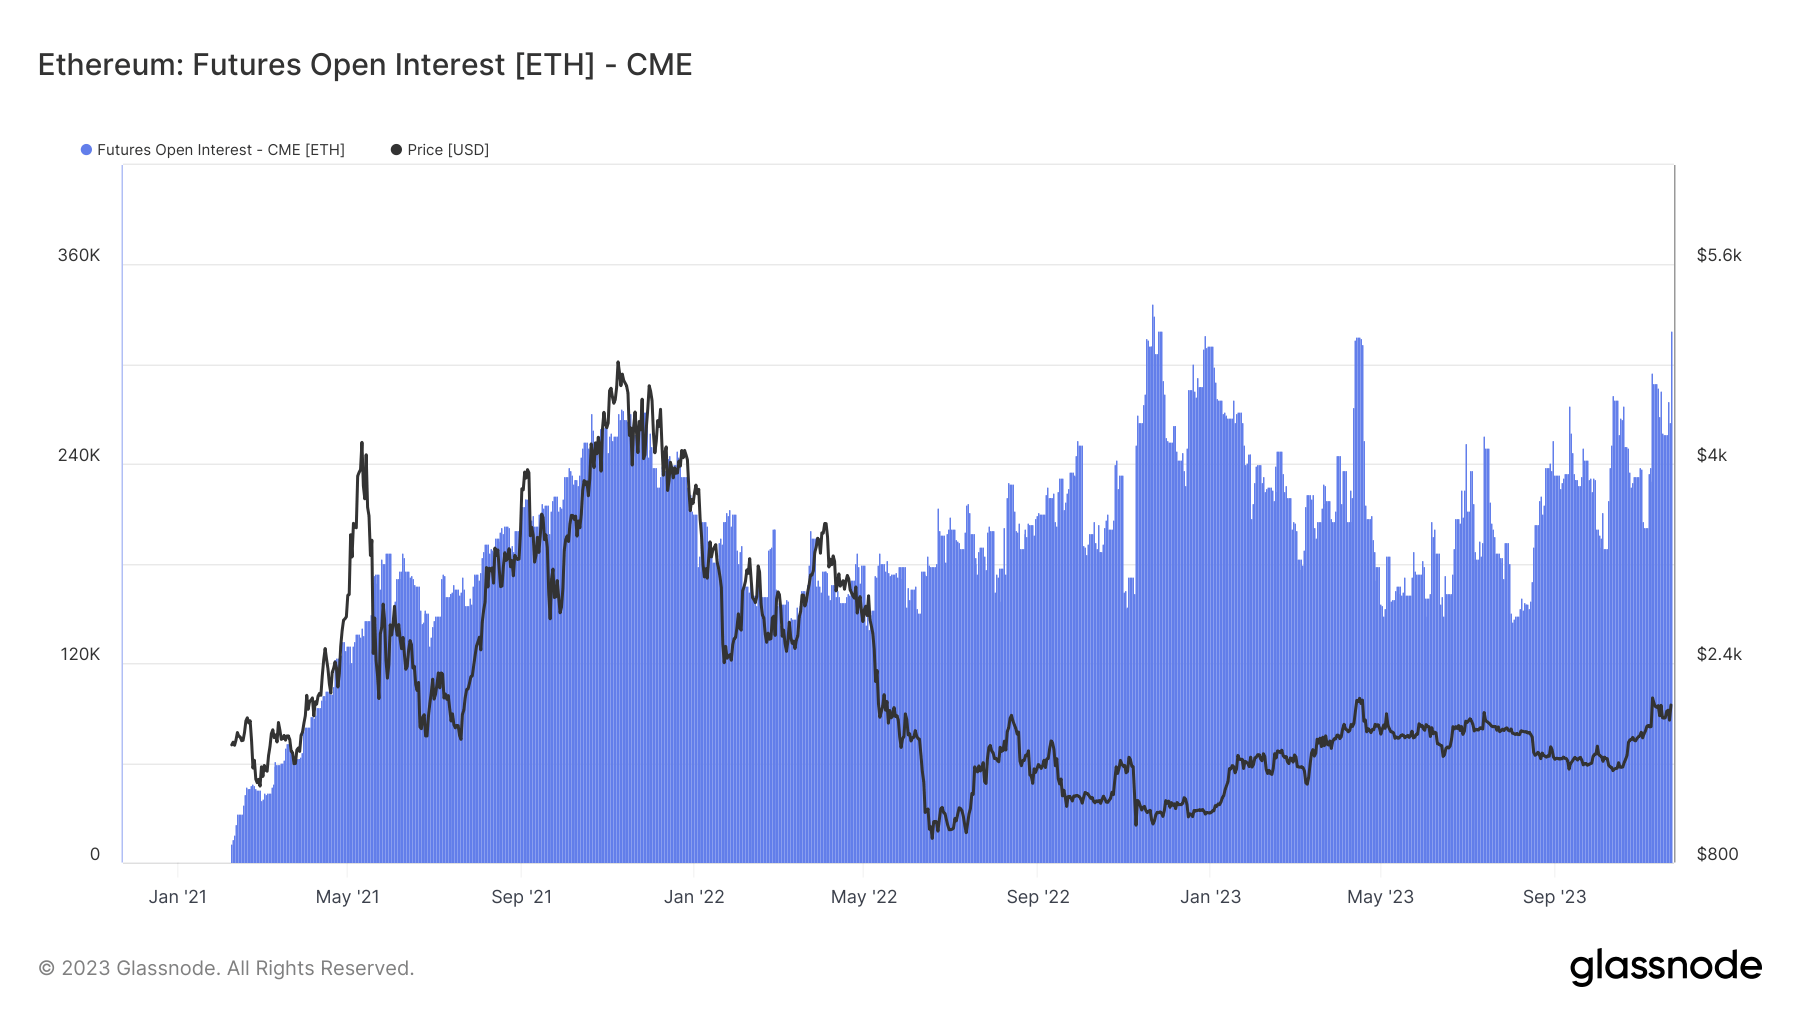 Ether options open interest on CME on track to hit fresh all-time high